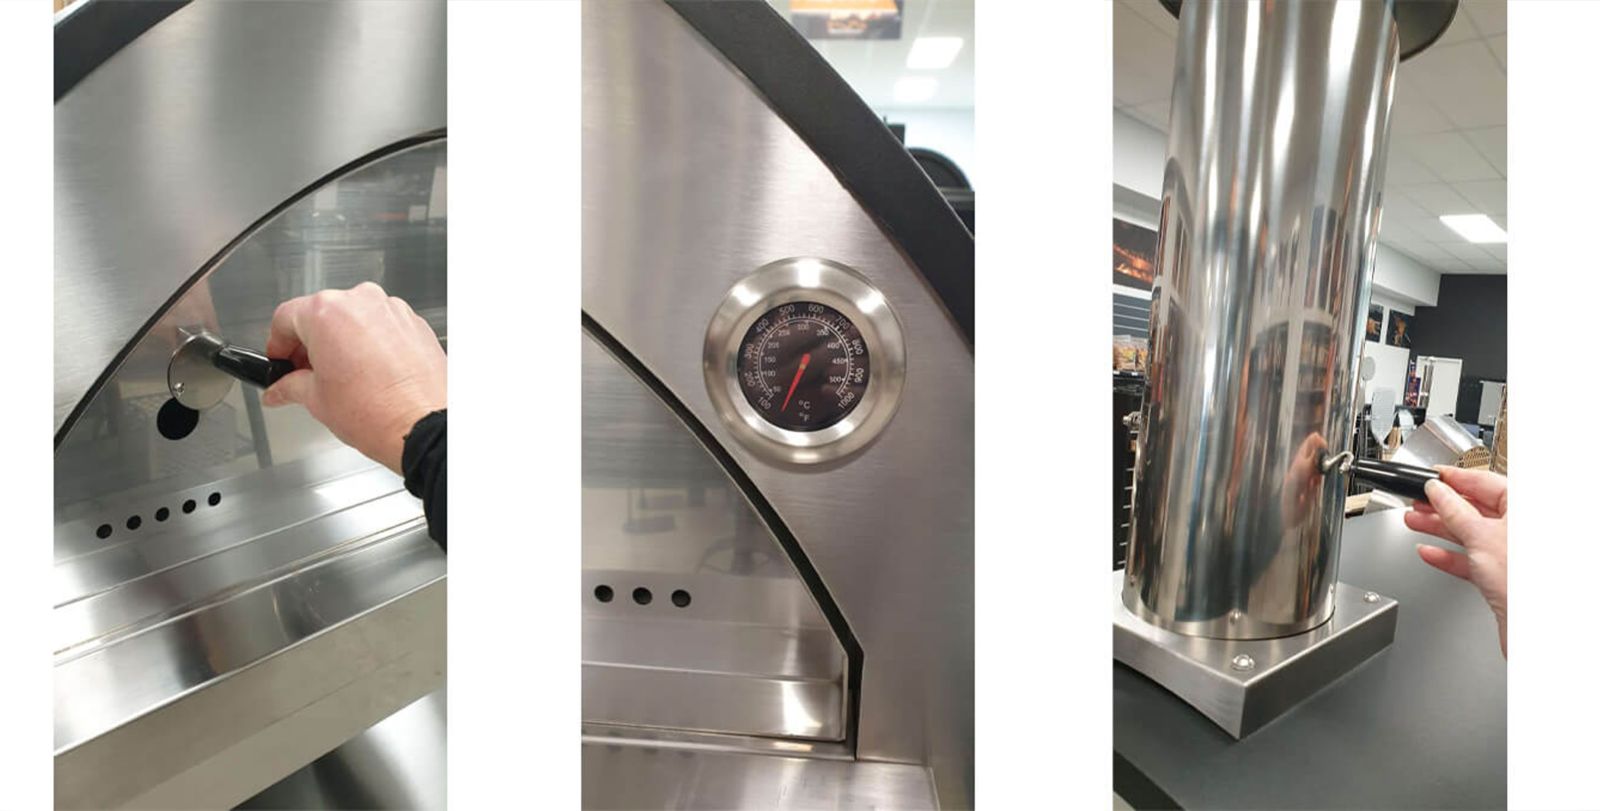 This image shows Pizza Oven's peep hole, Temperature Gauge and Flue  that allows airflow to be easily adjusted